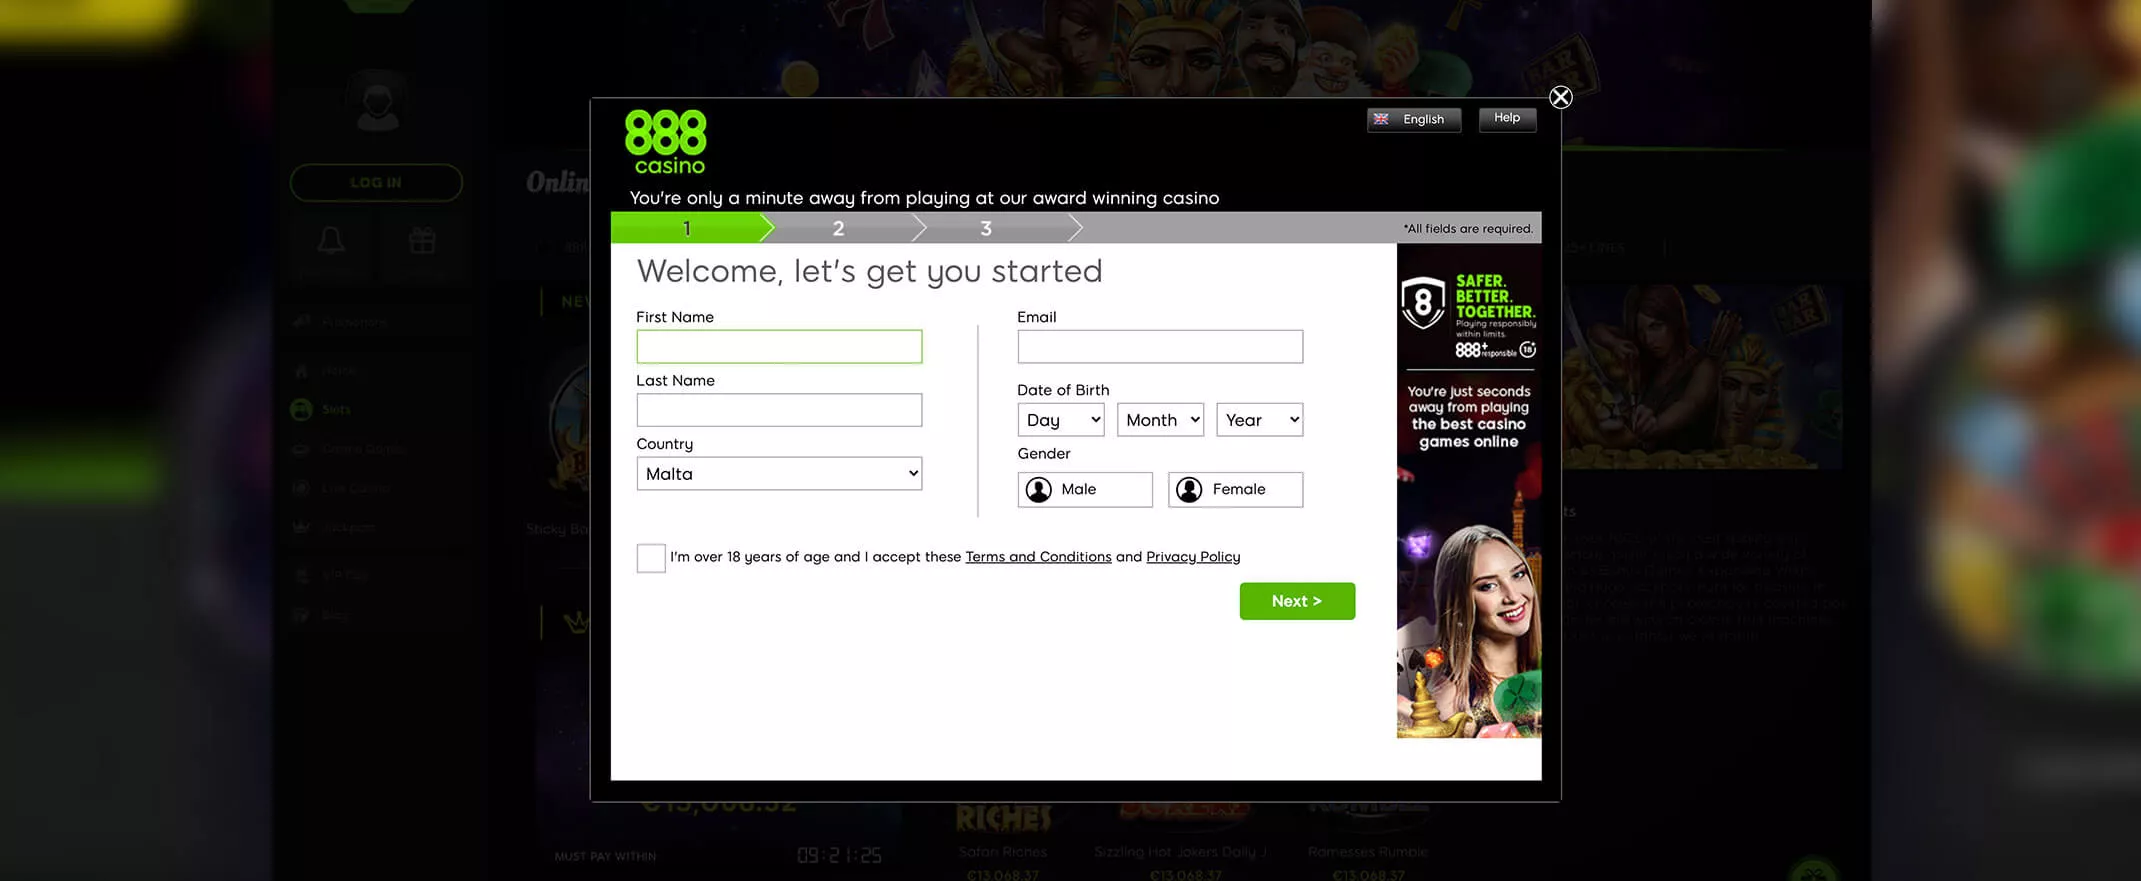 888 Casino screenshot of the registration page